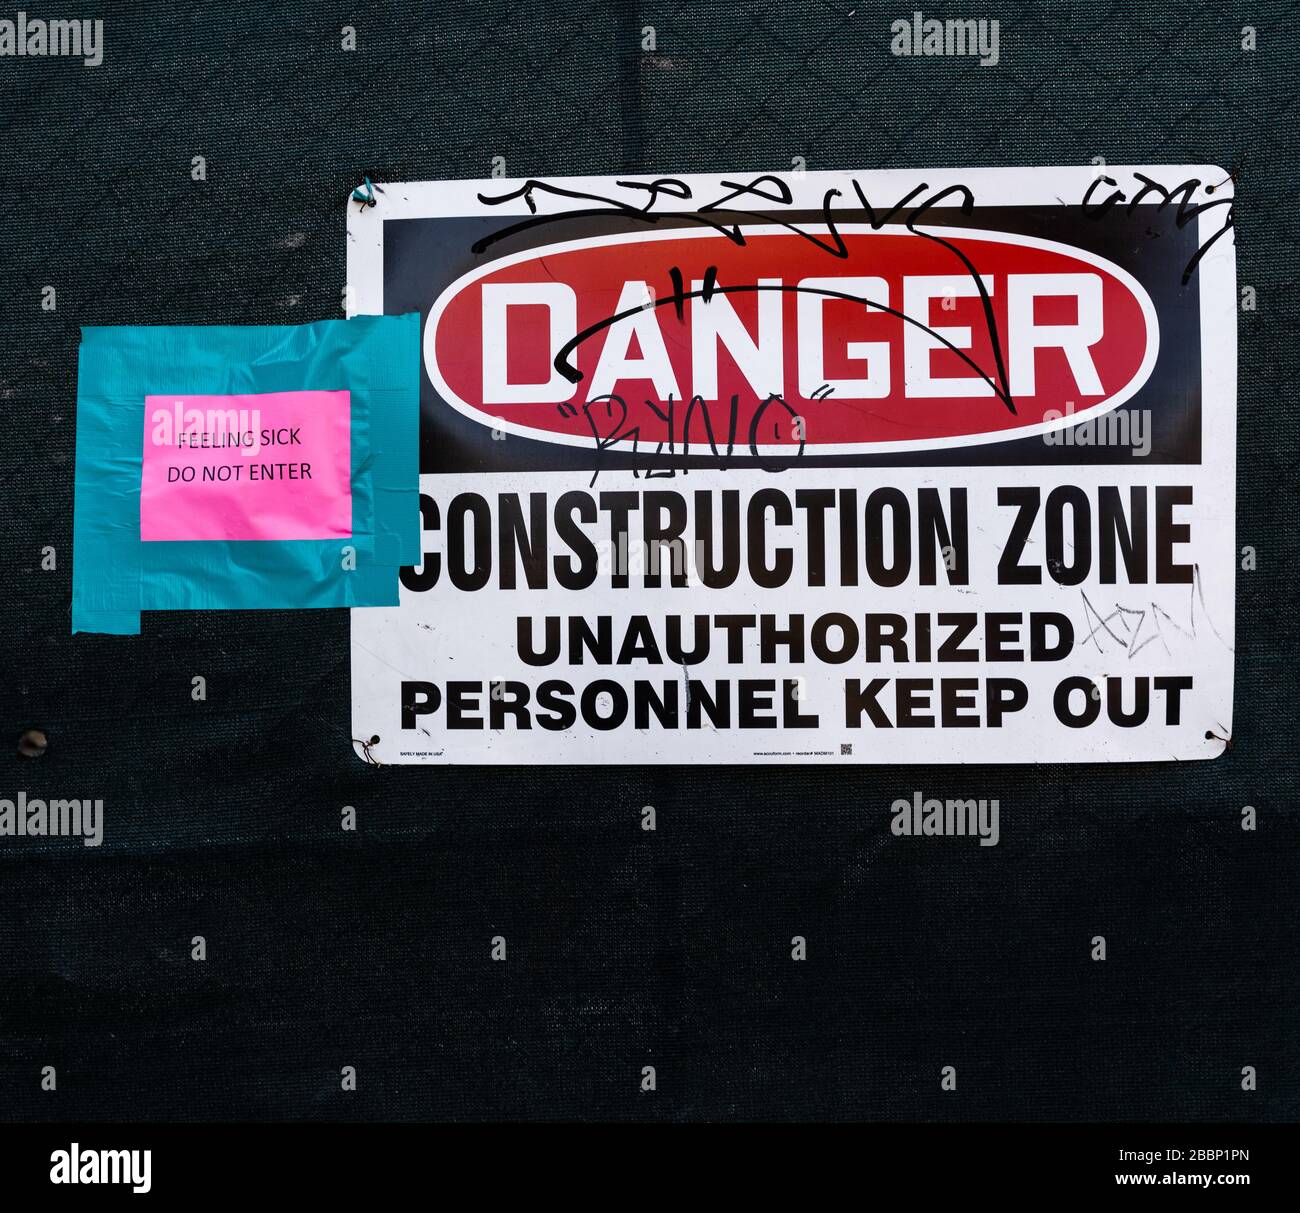 Sign at entrance to construction site that reads, 'feeling sick/do not enter.' Stock Photo